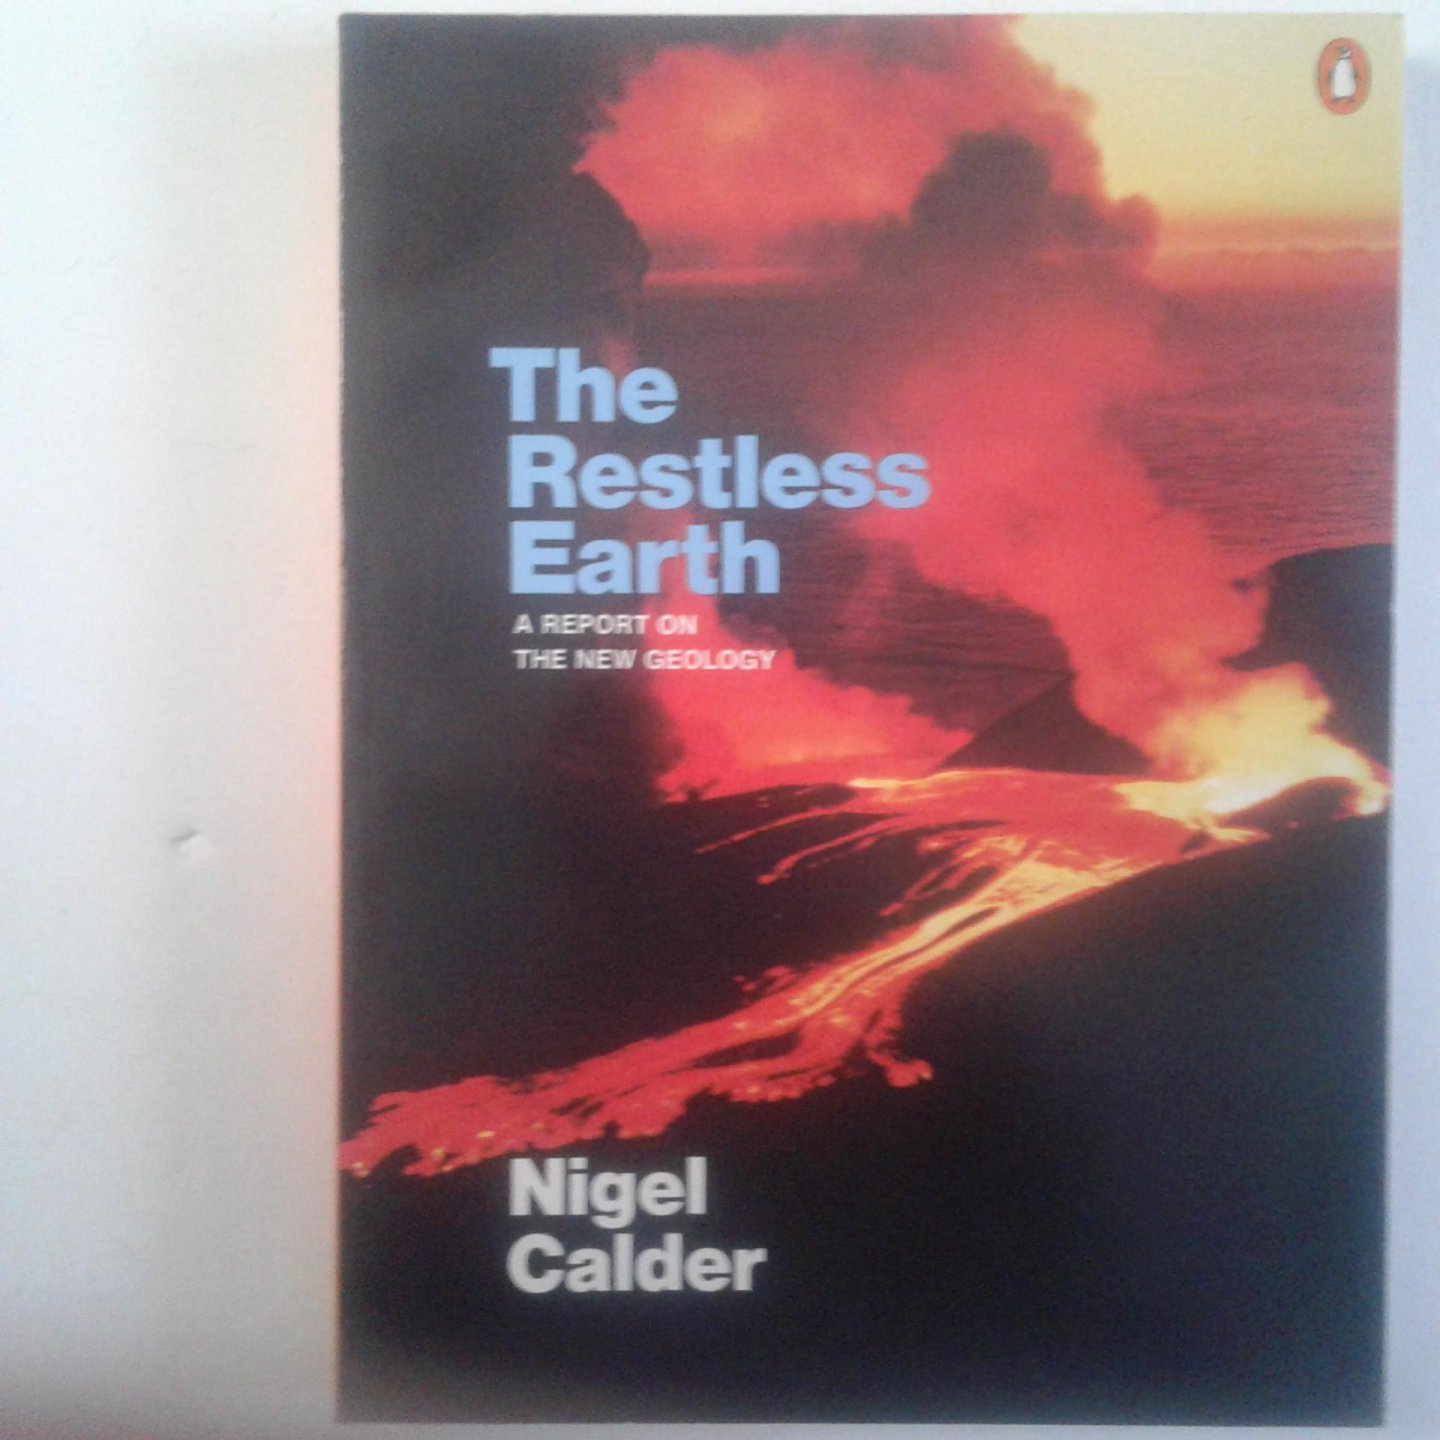 Calder, Nigel - The Restless Earth ; A Report on the New Geology